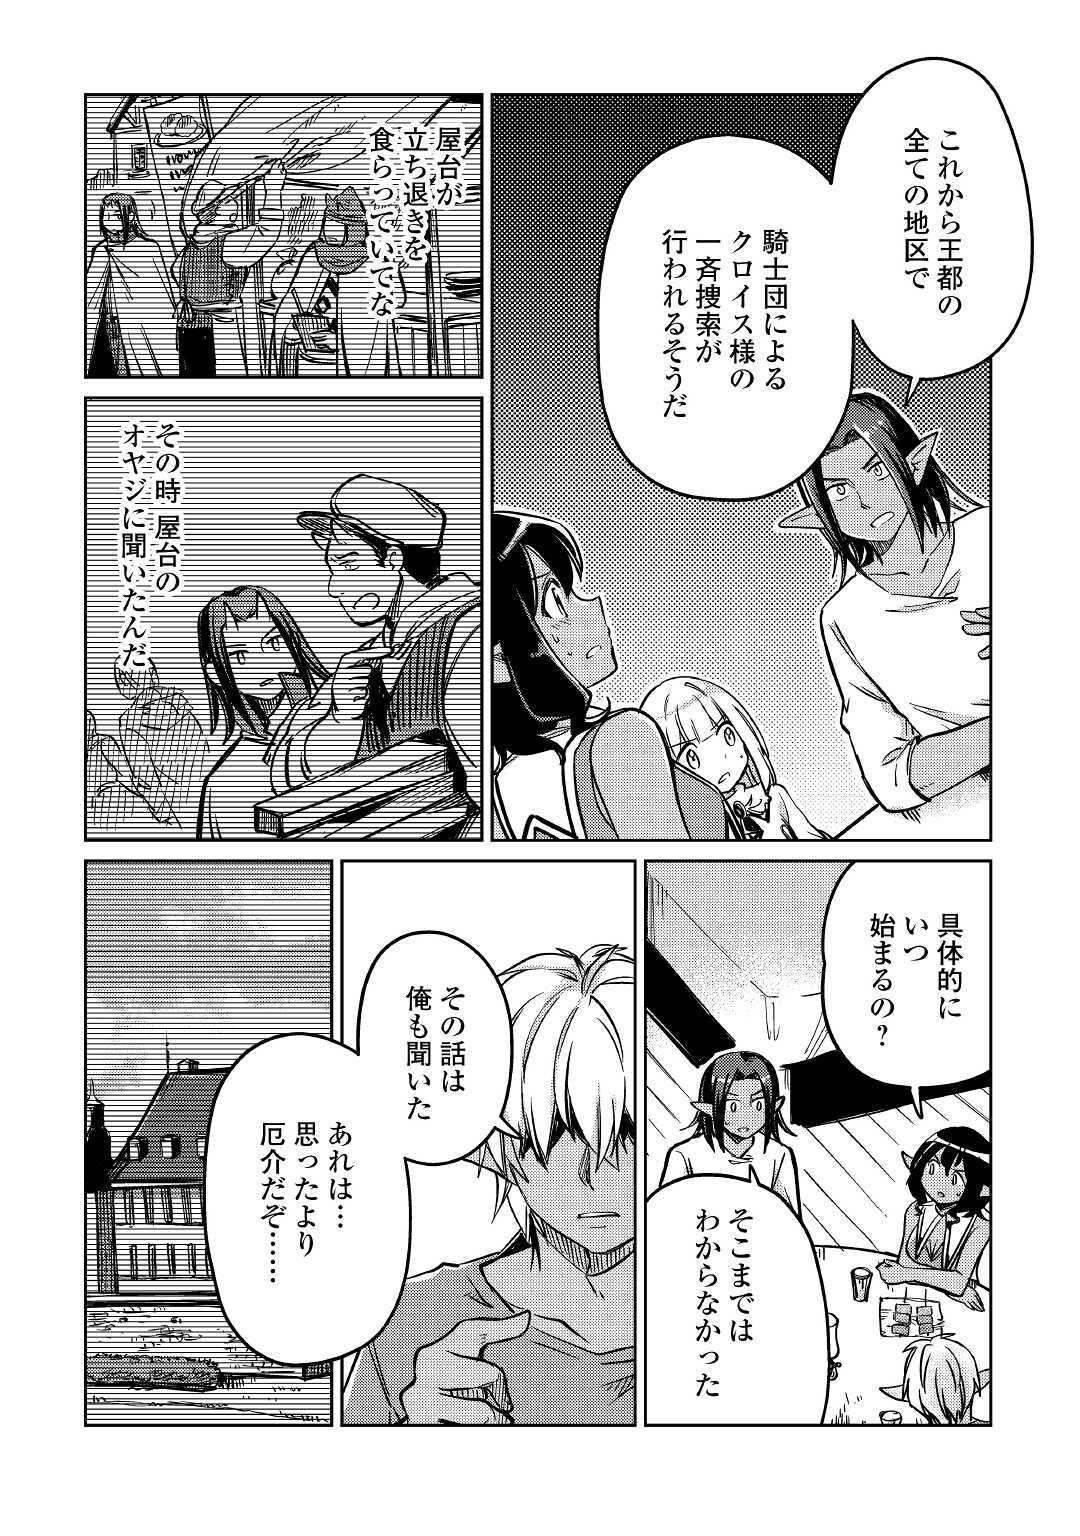 The Former Structural Researcher’s Story of Otherworldly Adventure 第26話 - Page 30